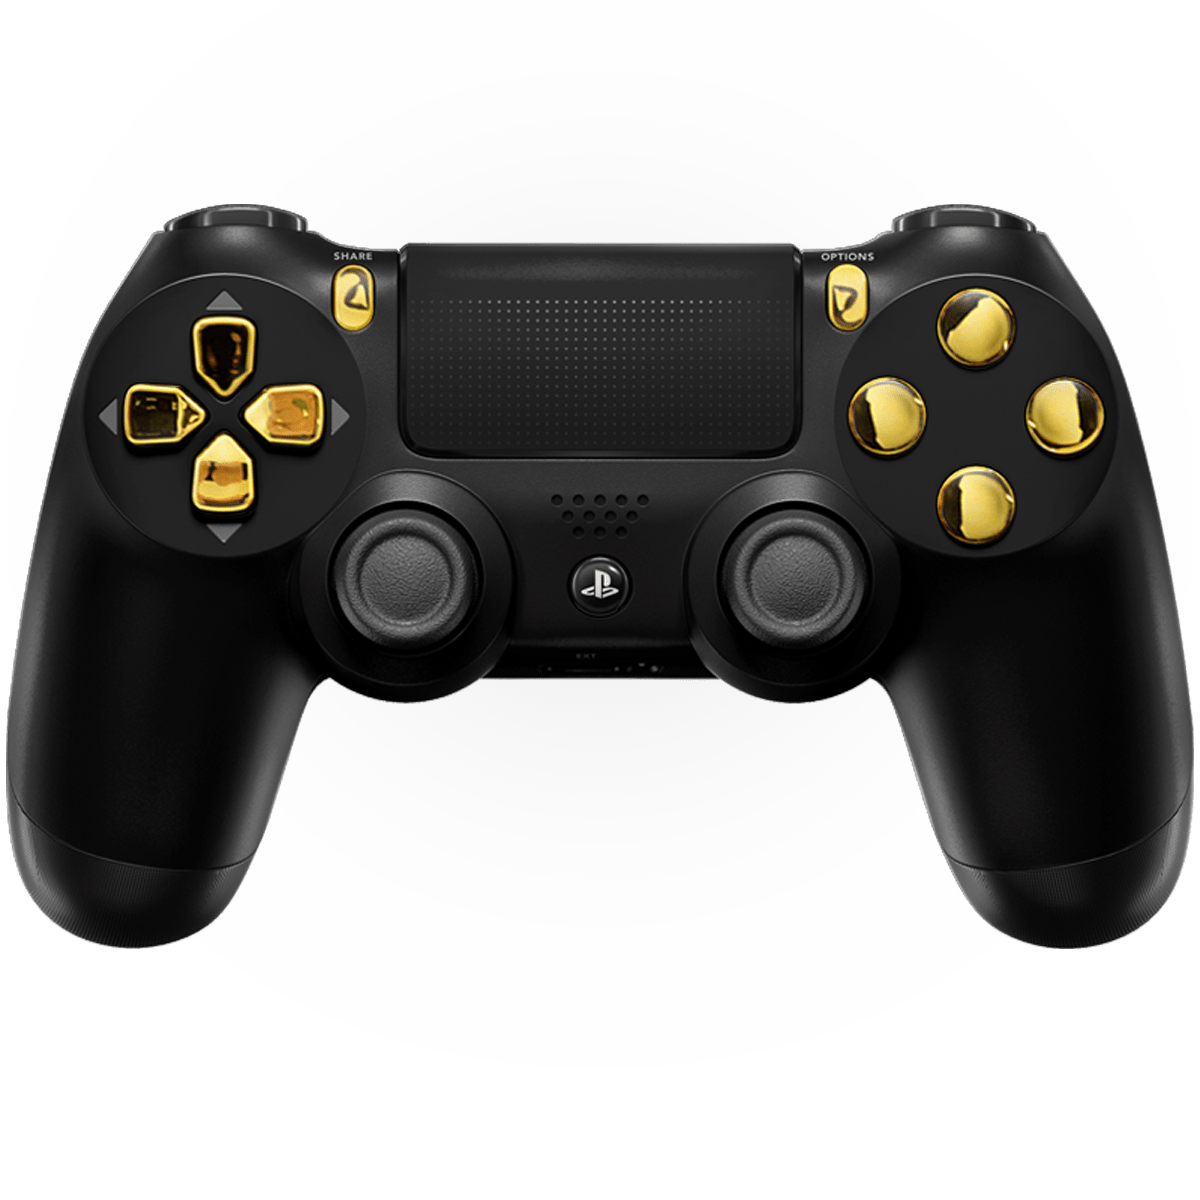 Gold Thunder Smart Rapid Fire Custom MODDED Controller Compatible with PS5 Cod FPS Games + More